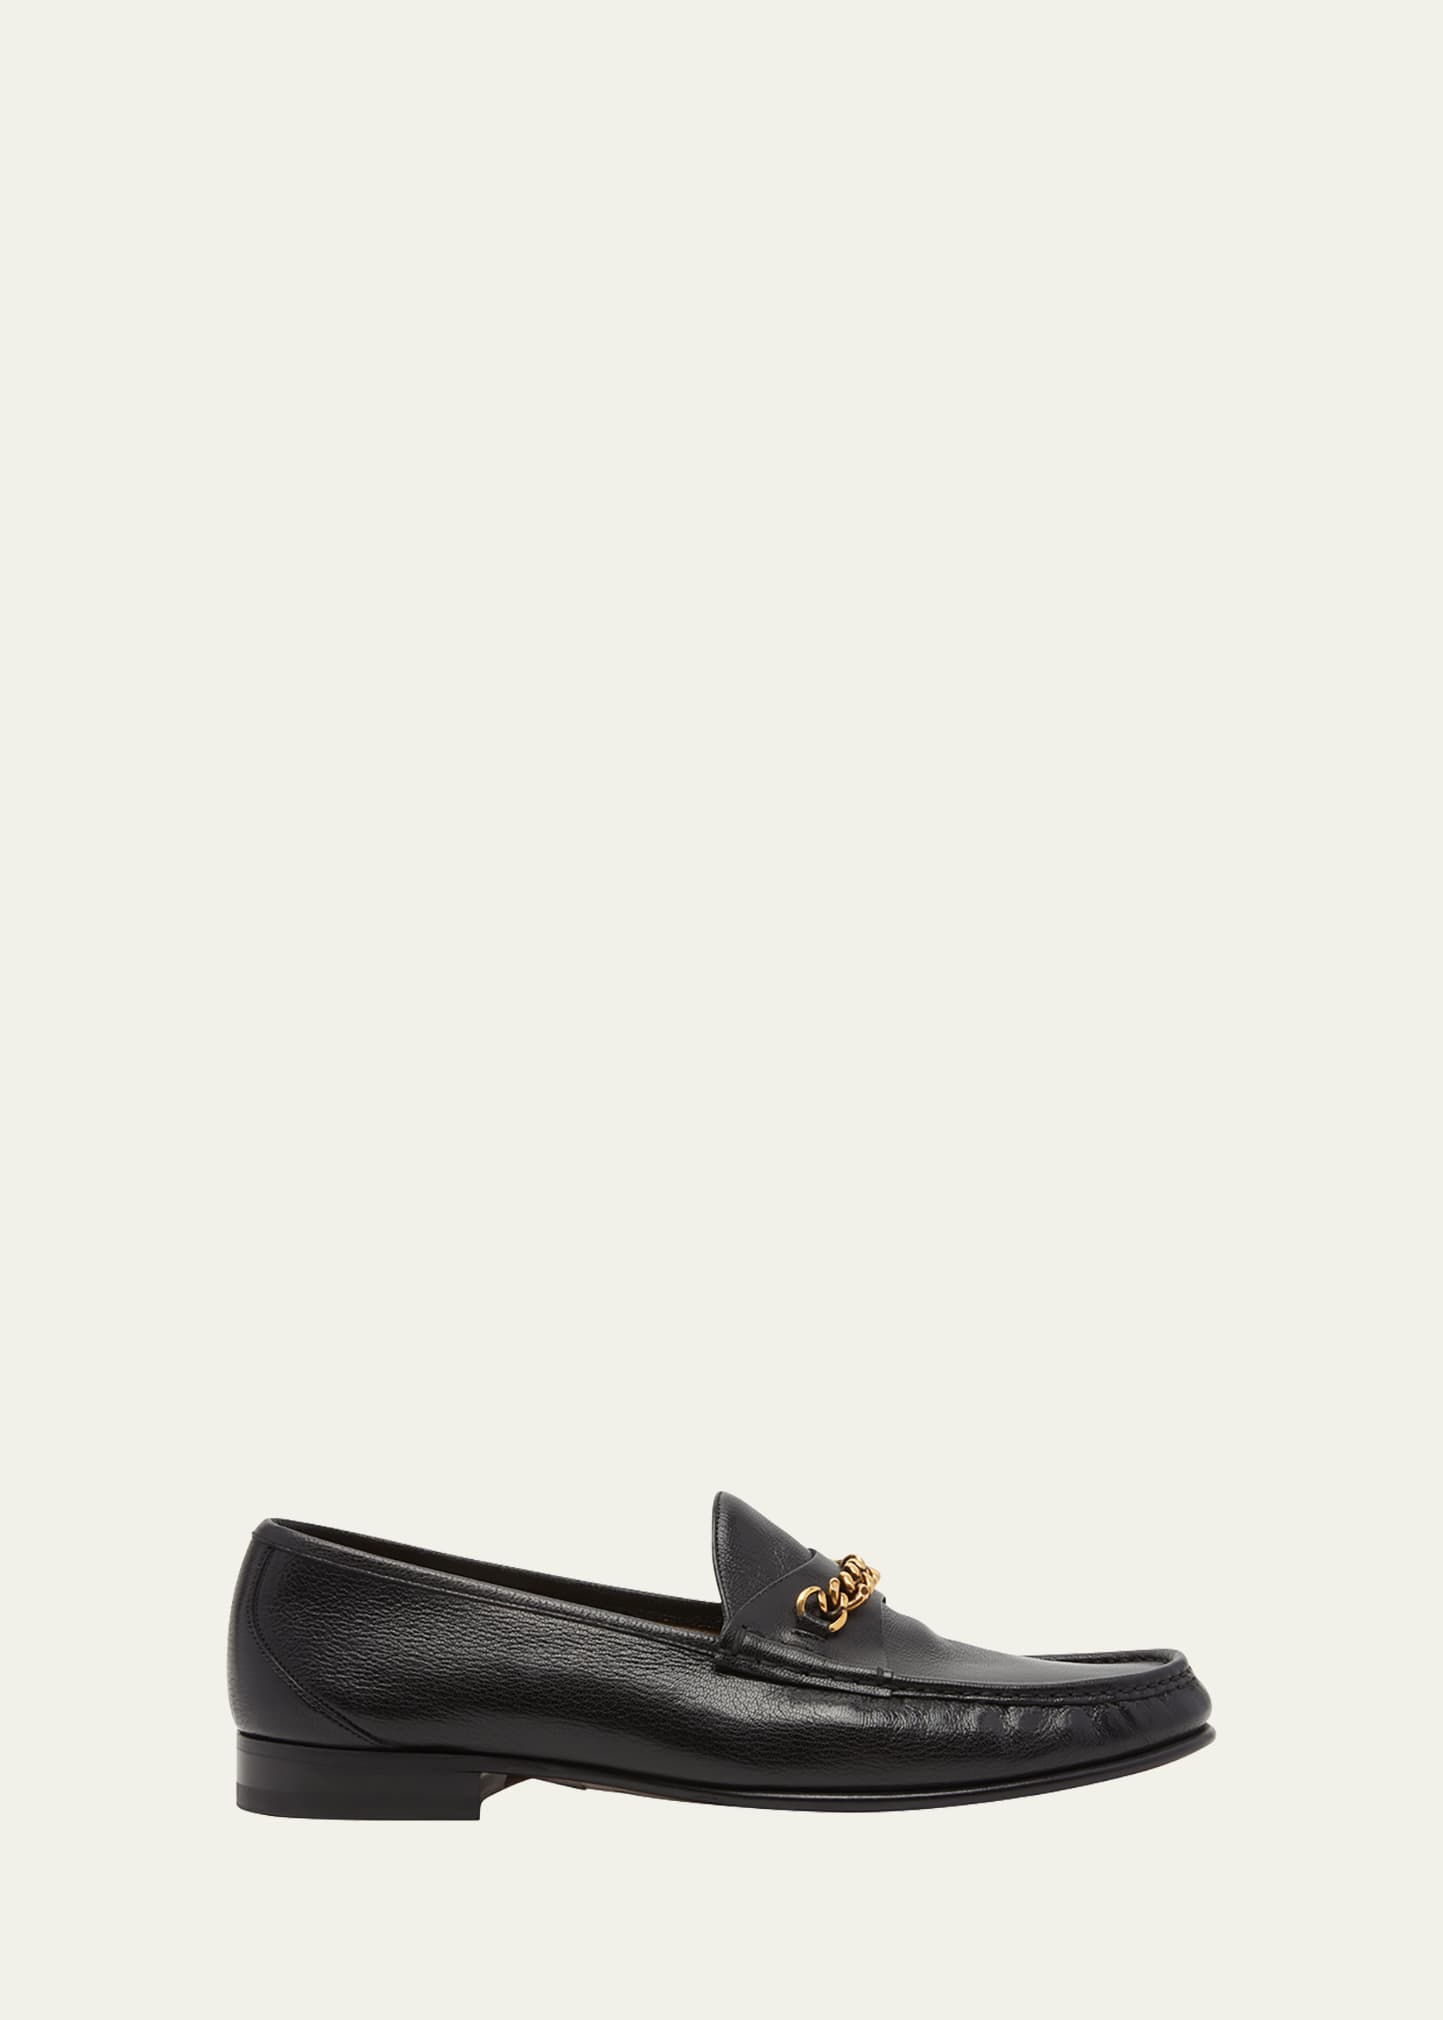 TOM FORD MEN'S YORK CURB CHAIN LEATHER LOAFERS